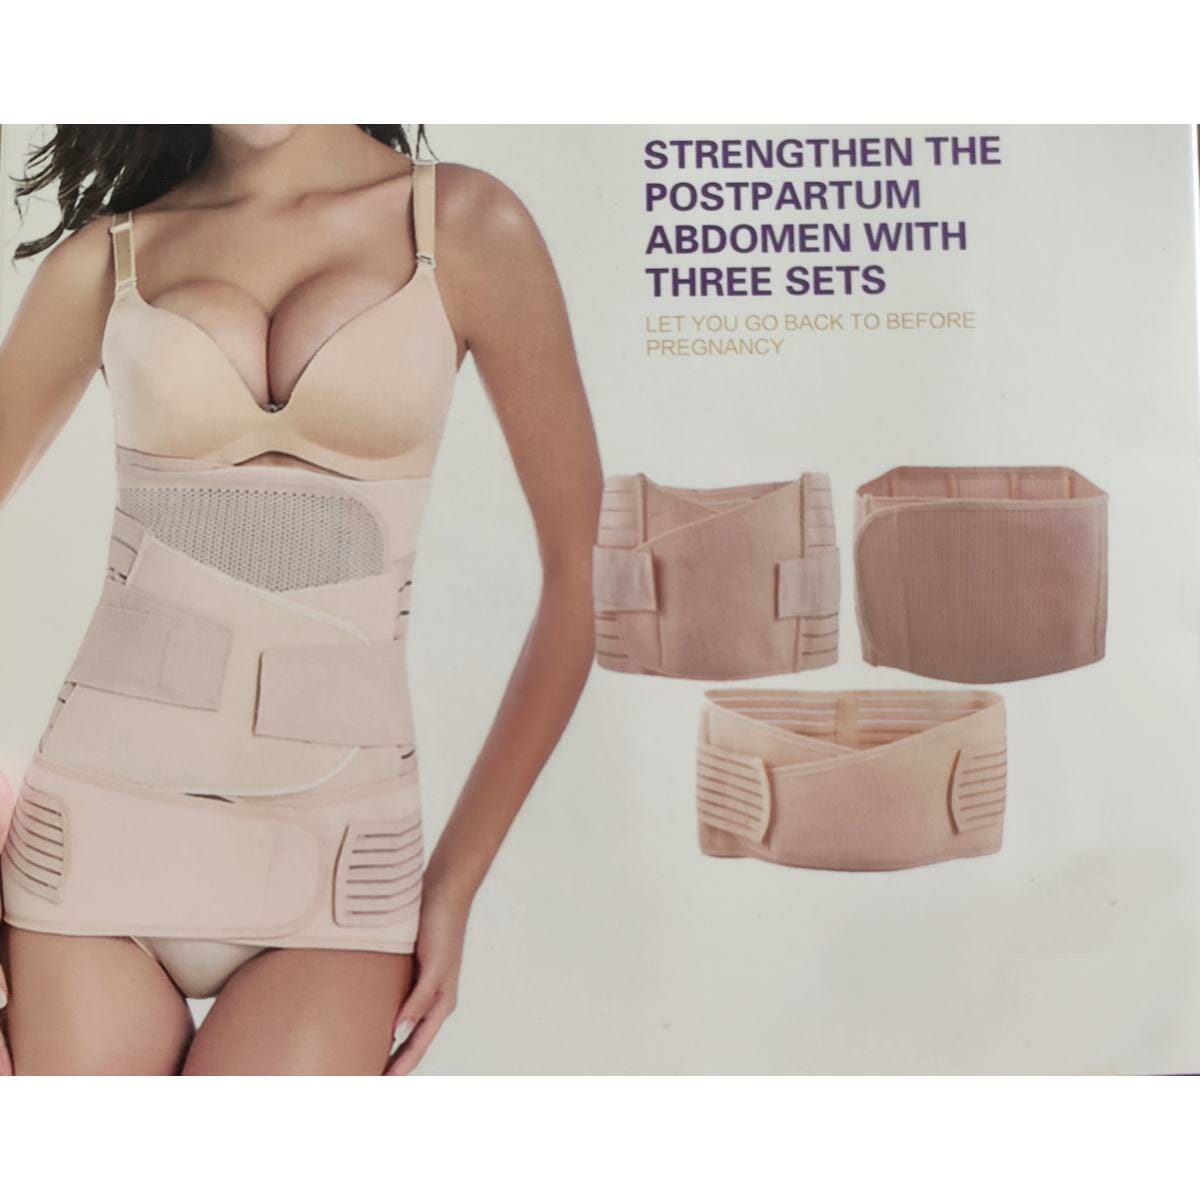 Post-Partum Girdles: Why They Work